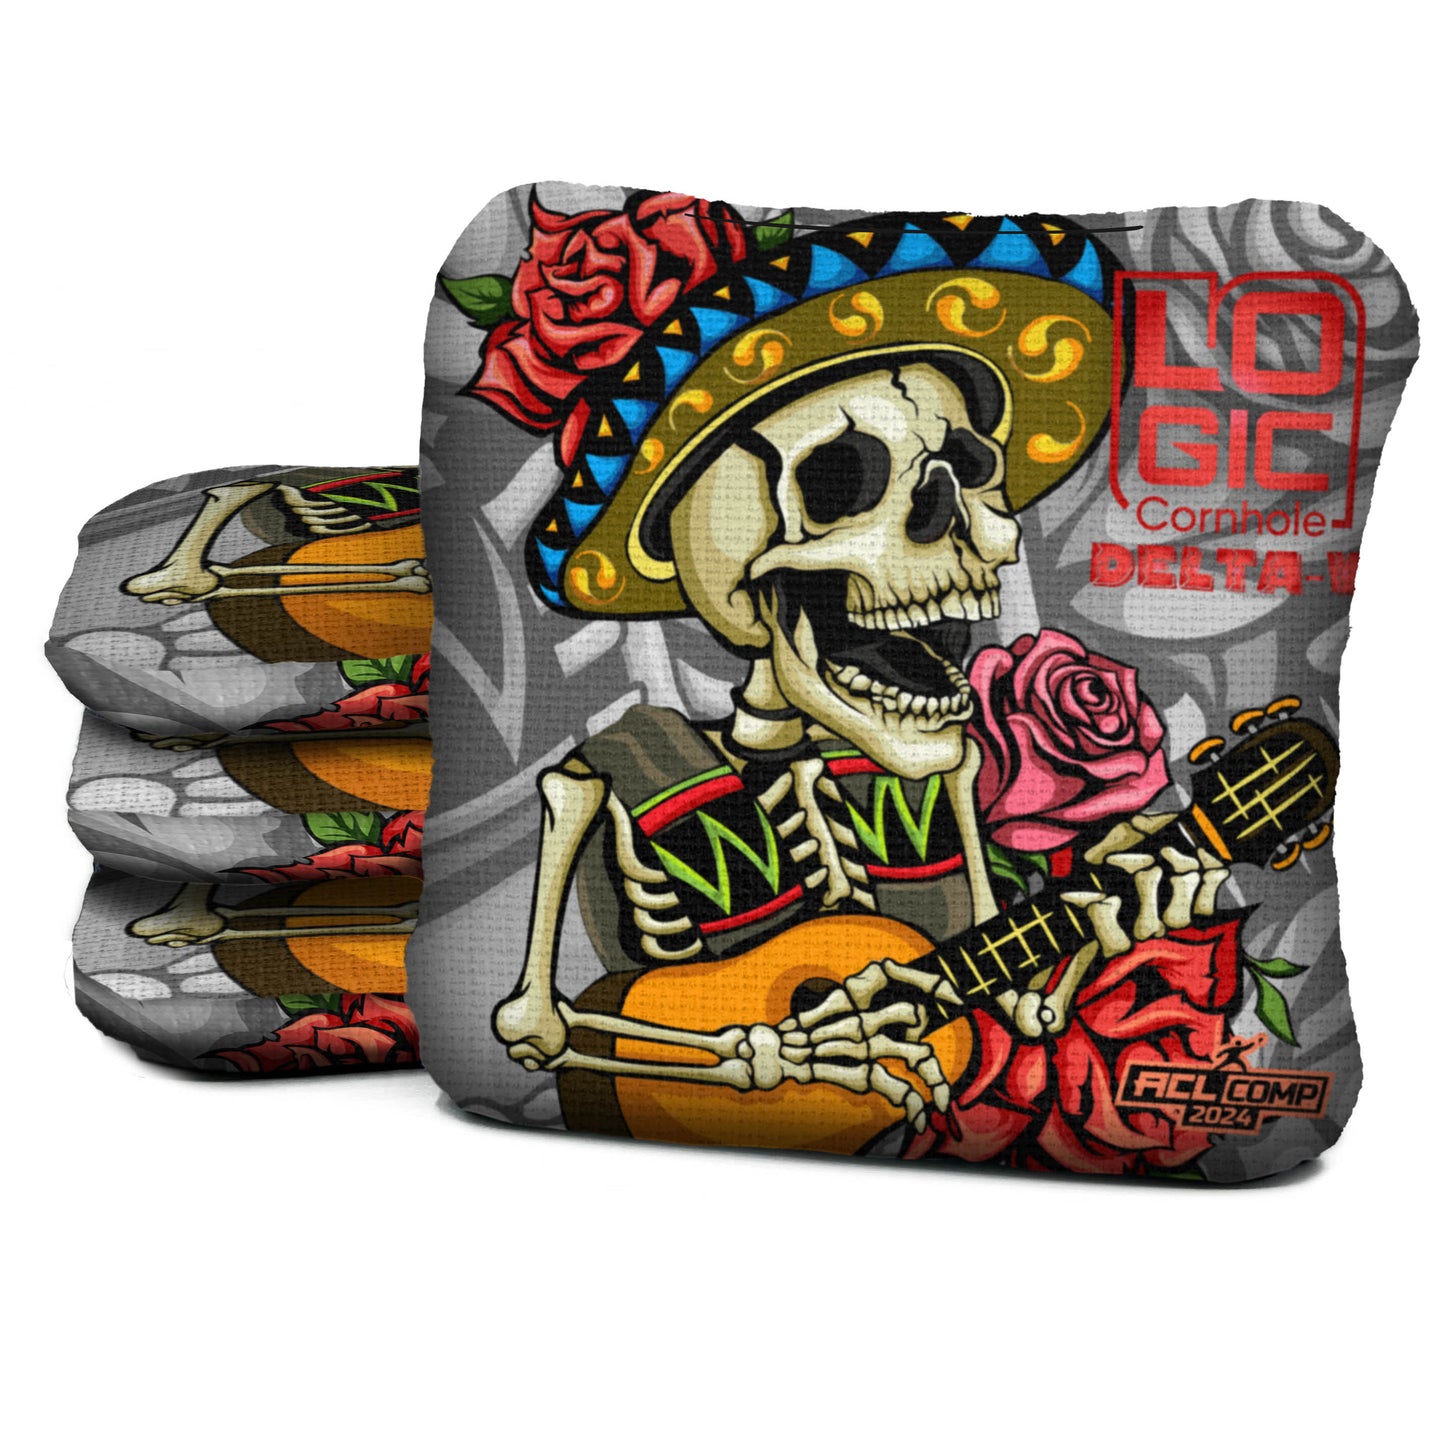 Mariachi - MULTIPLE BAG SERIES - ACL APPROVED BAGS - Set of 4 bags (RETIRED DESIGN)